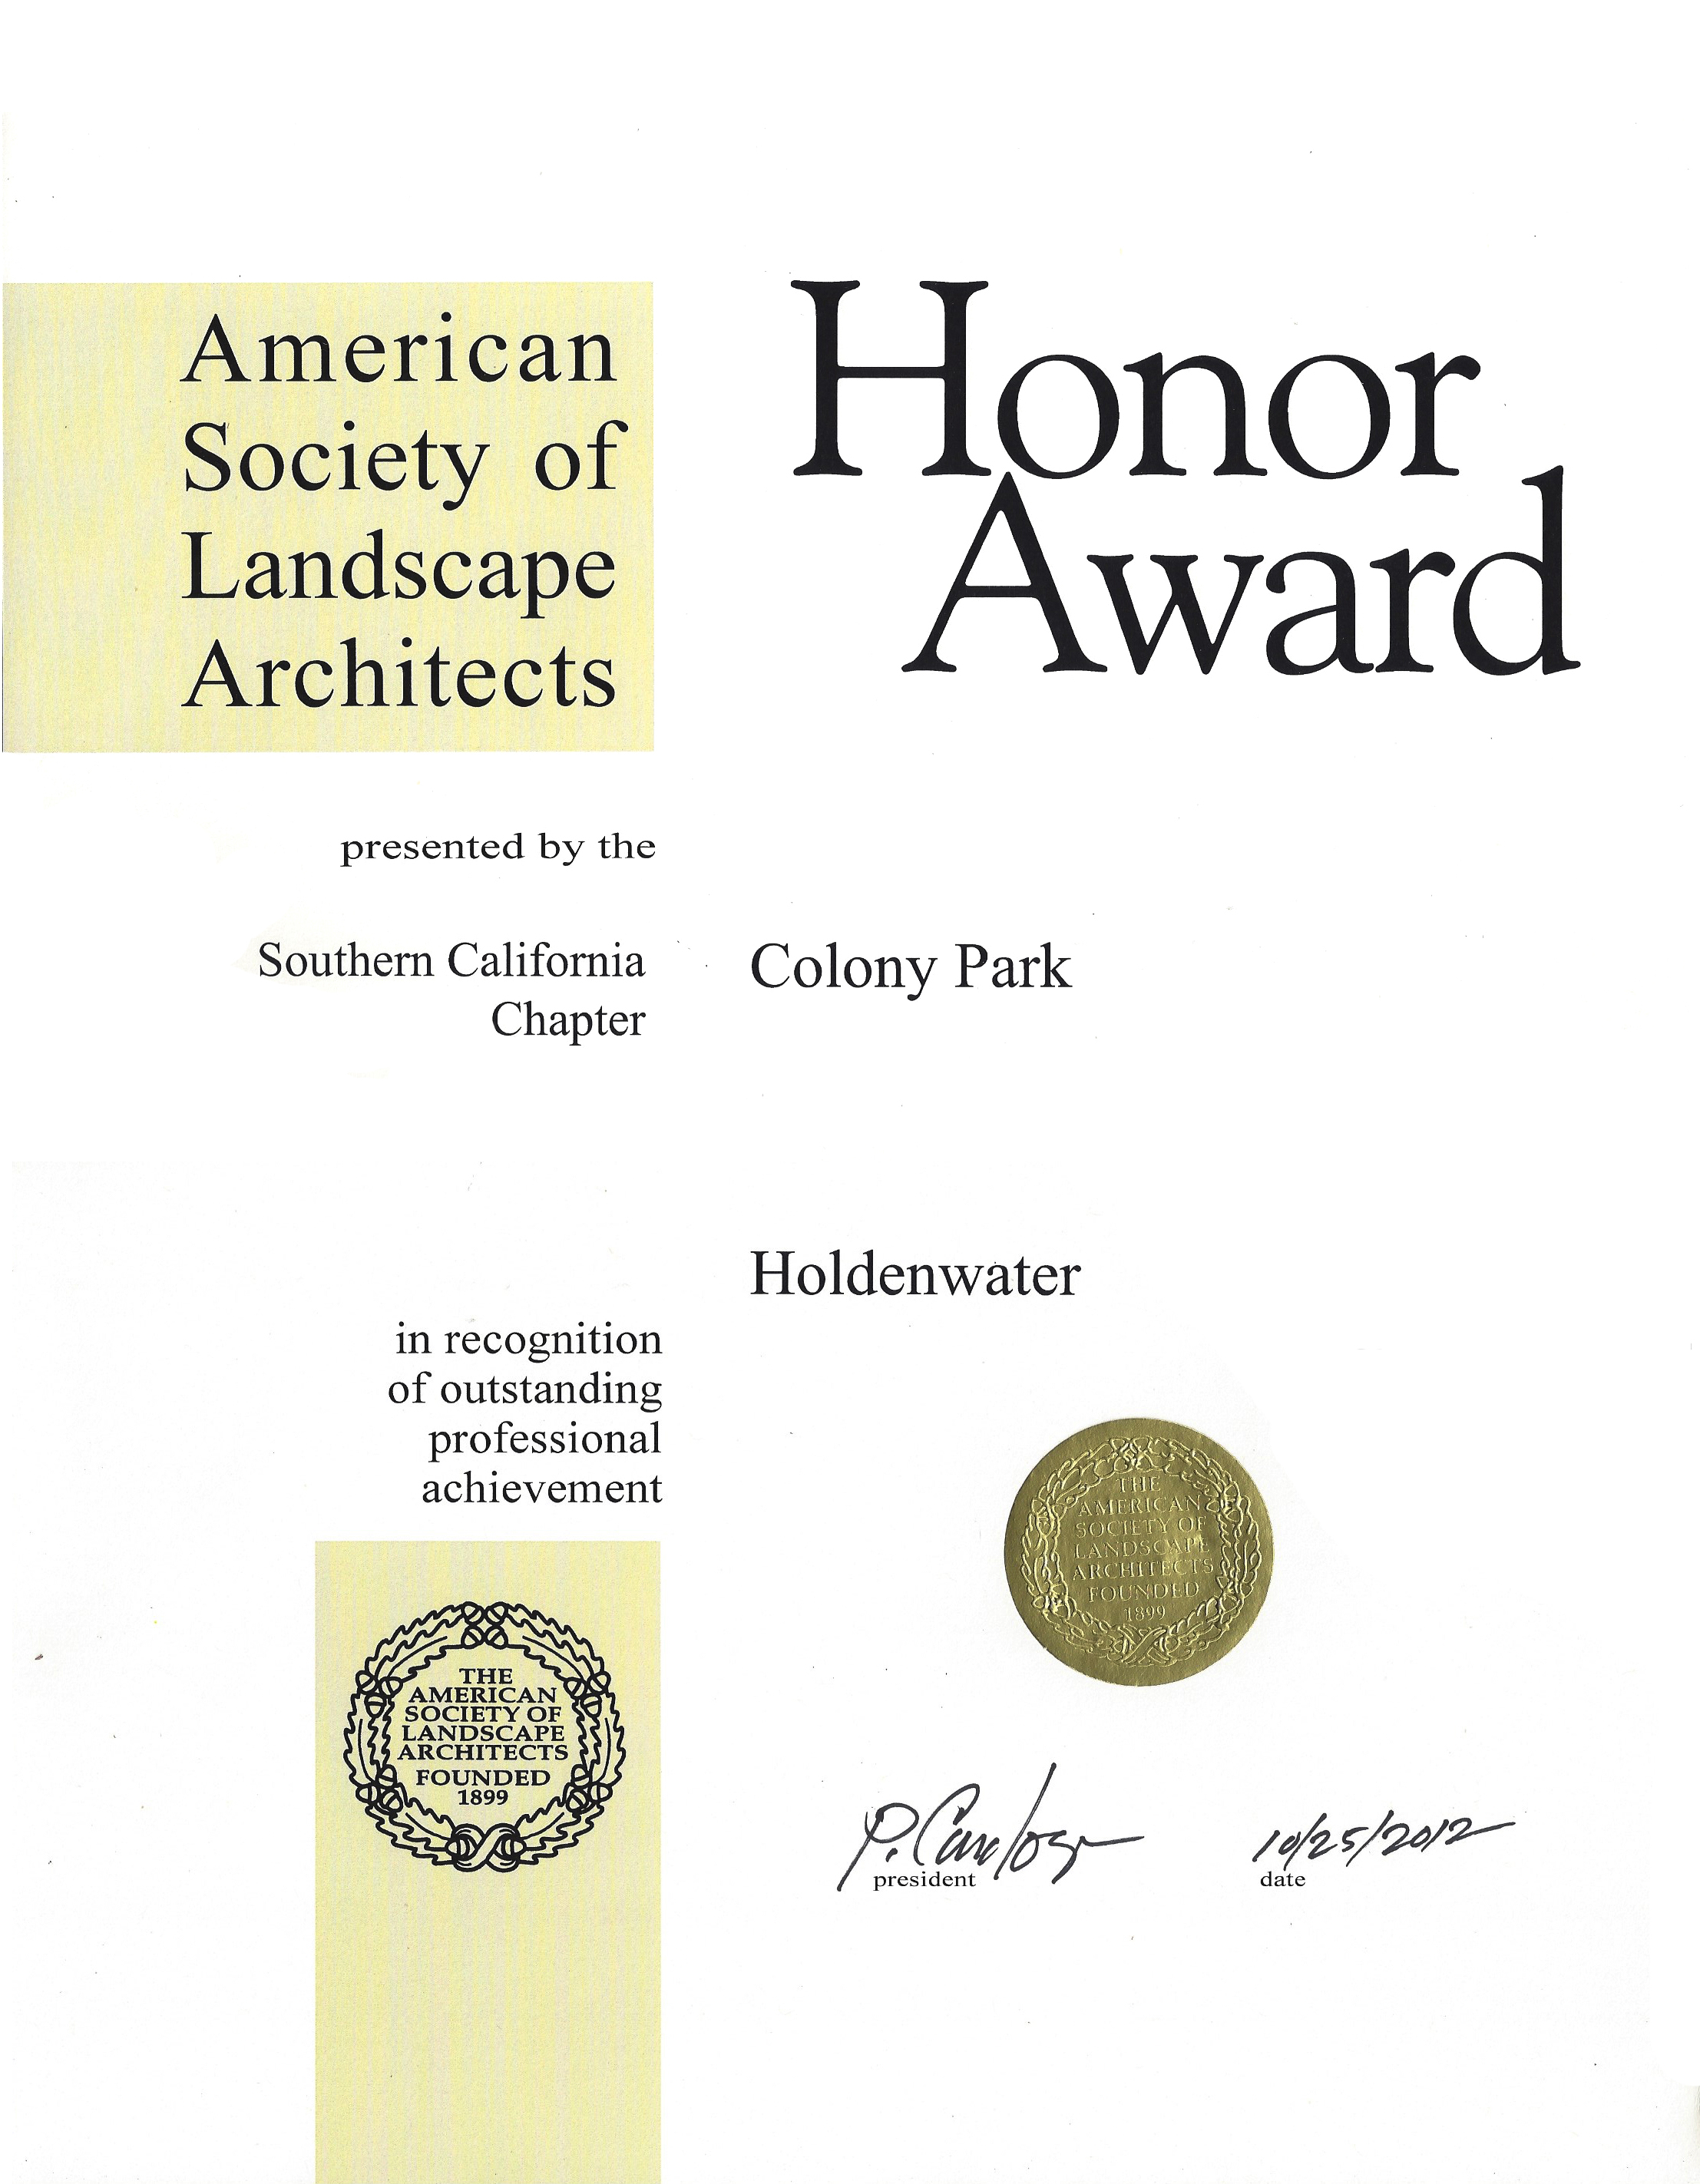 Award from American Society of Landscape Architects